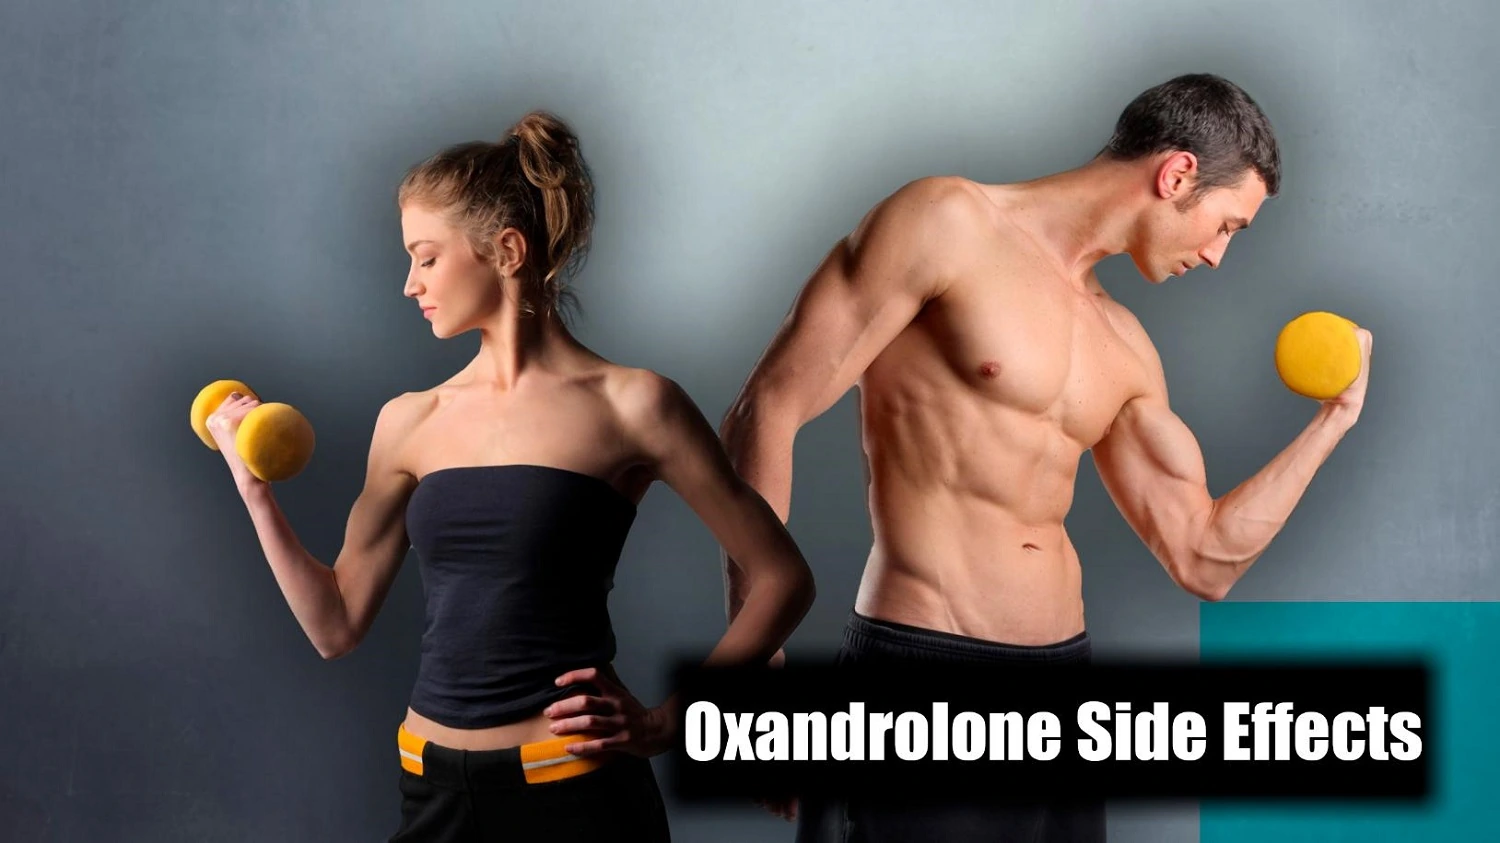 Anavar – Oxandrolone Side Effects as Misuse of This Steroid Cycle by Beginners and Professional Athletes